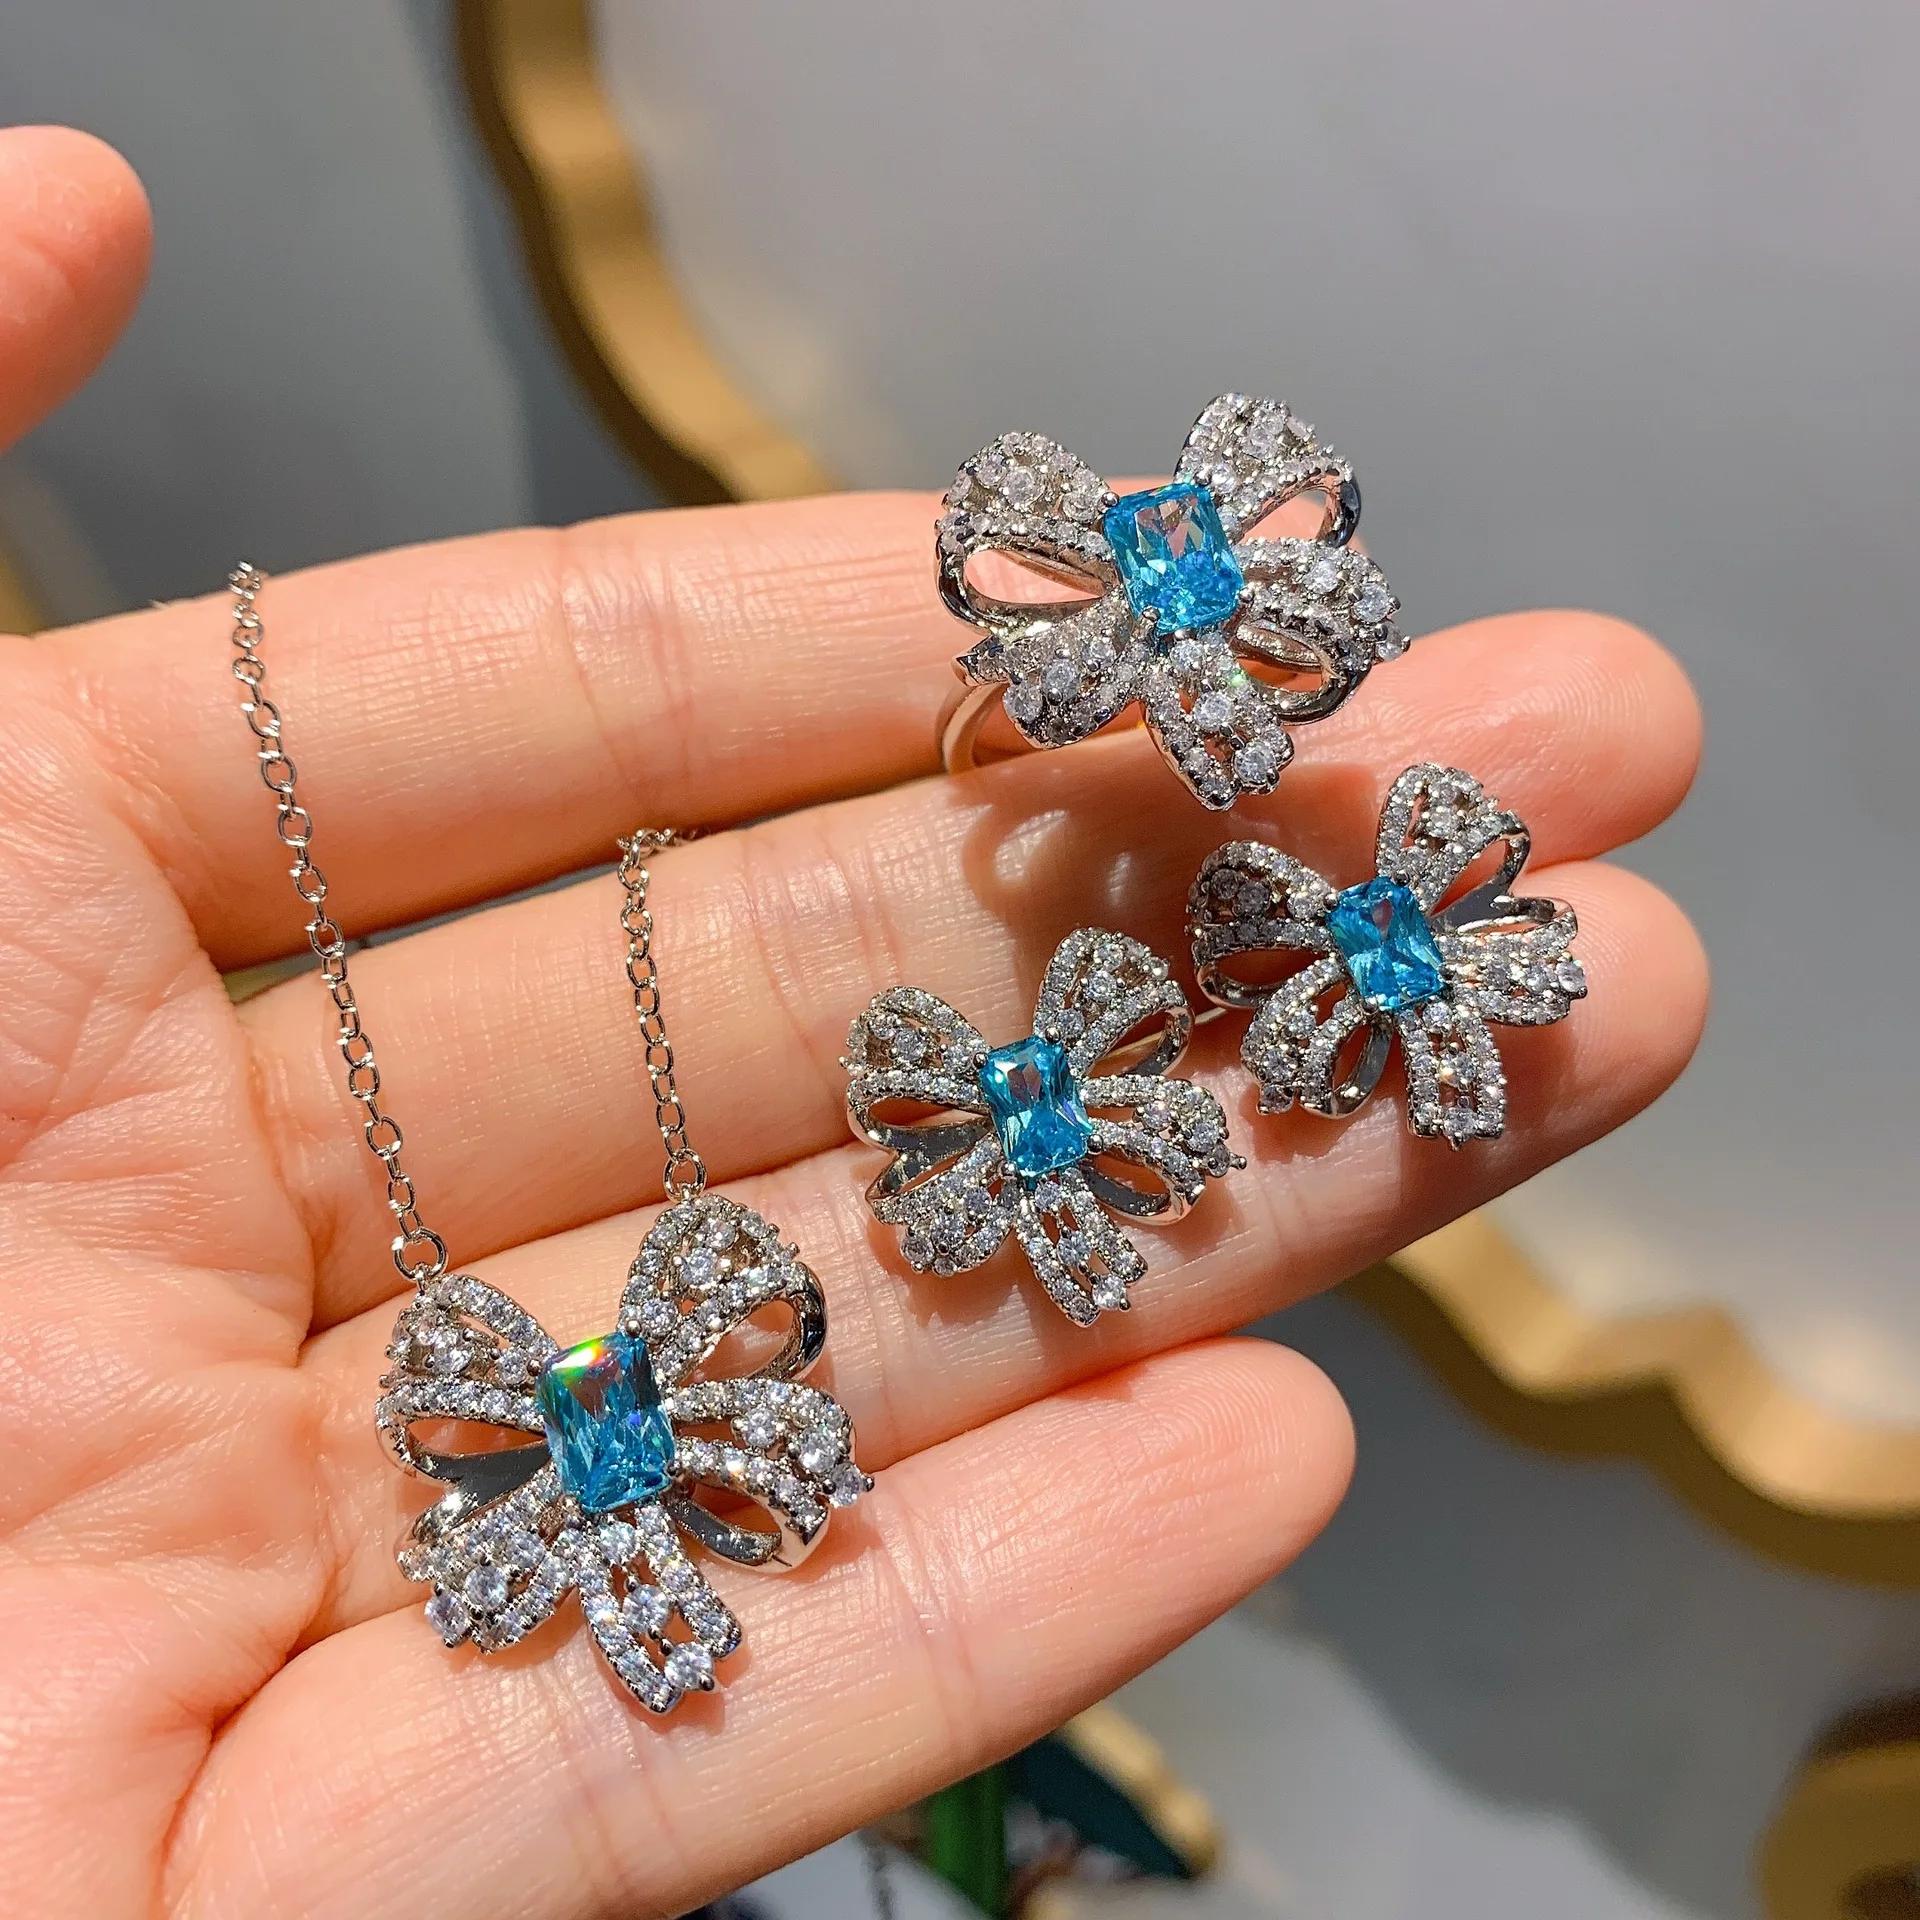 

JitDoo Fashion Girls Pendant Necklace With Bright Blue Crystal Stone Wedding Anniversary Statement Jewelry for Women Wholesale